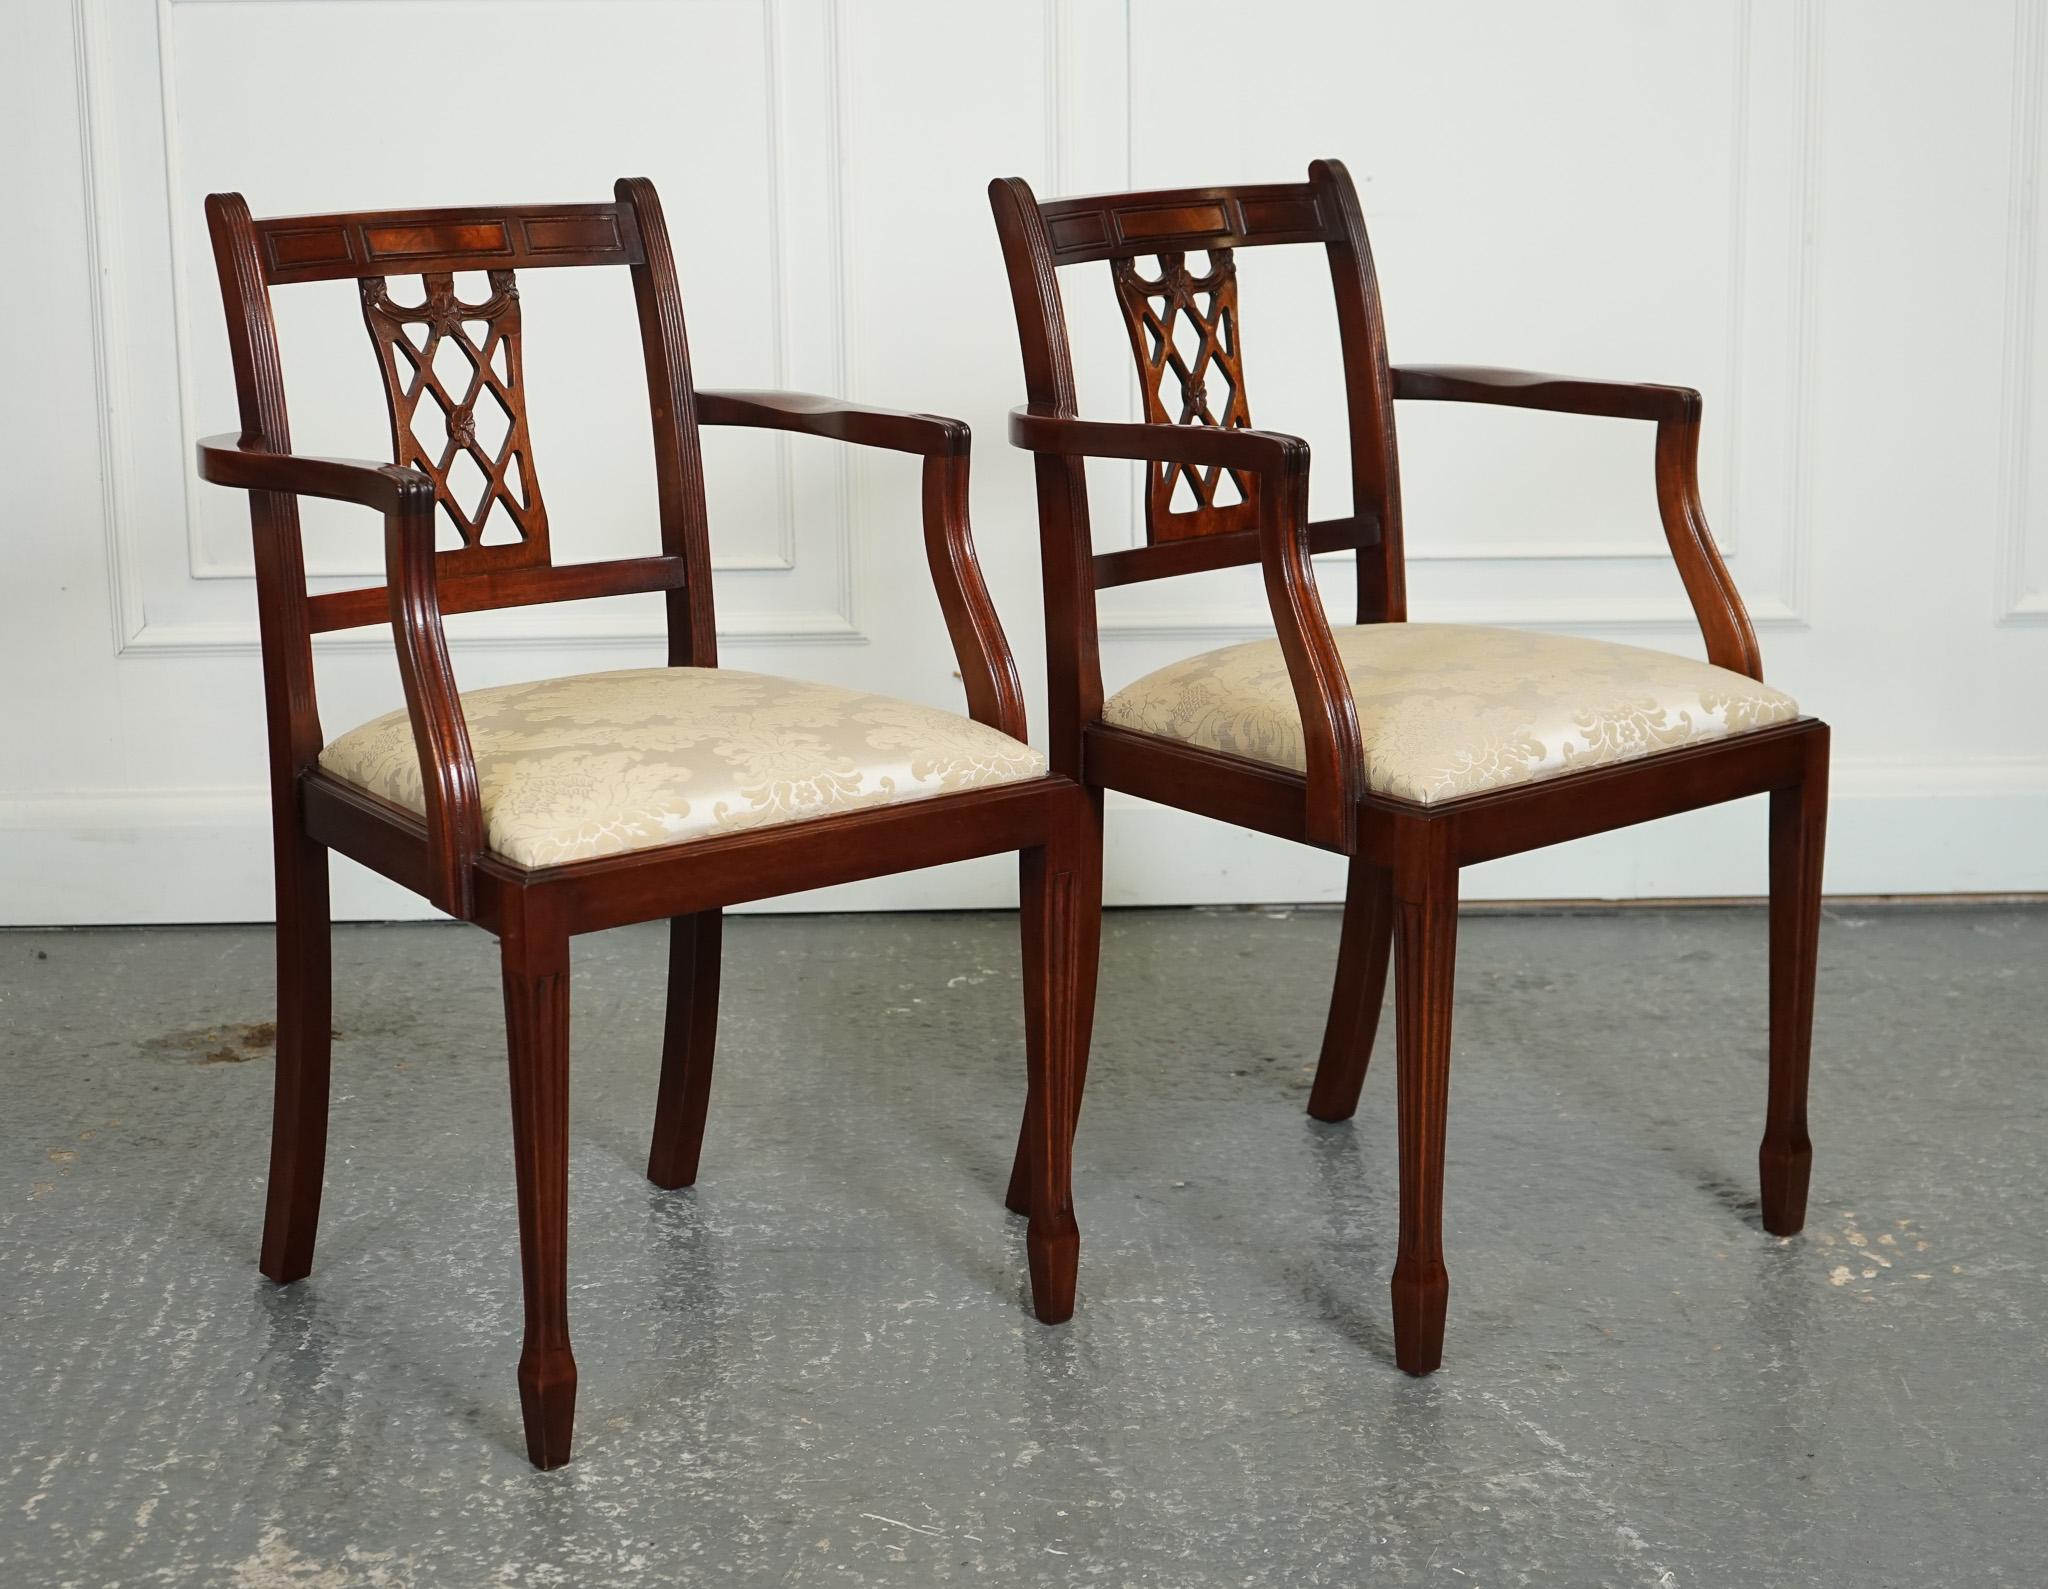 HEPPLEWHITE STYLE BEVAN FUNNELL SET OF 5 DINING CHAiRS CREAM UPHOLSTERED SEATS For Sale 3